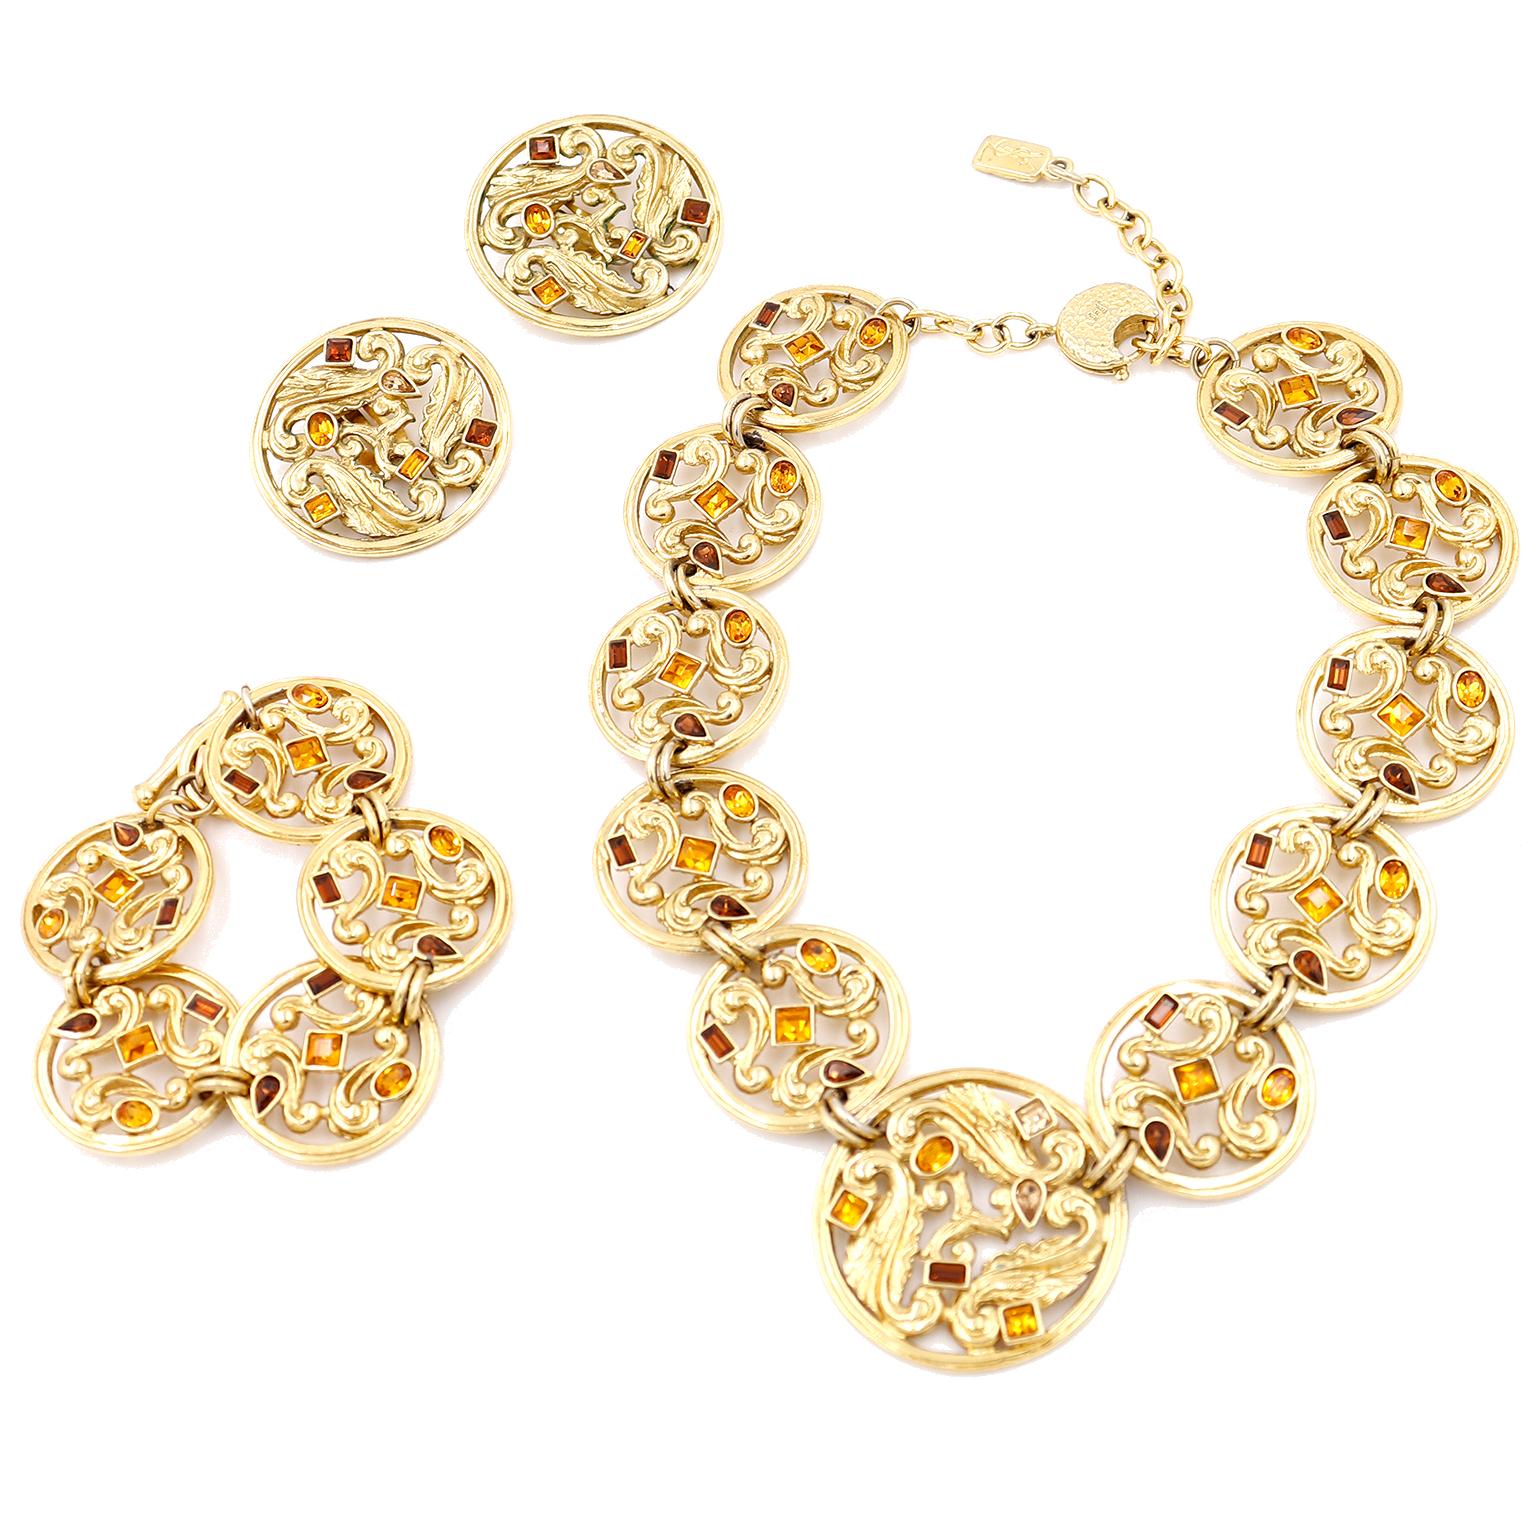 This is an incredible 1980's full 3 piece gold plated jewelry set from Yves Saint Laurent. This set includes a necklace, a pair of clip on earrings and bracelet. YSL jewelry is particularly collectible and it becomes even more so when you are able